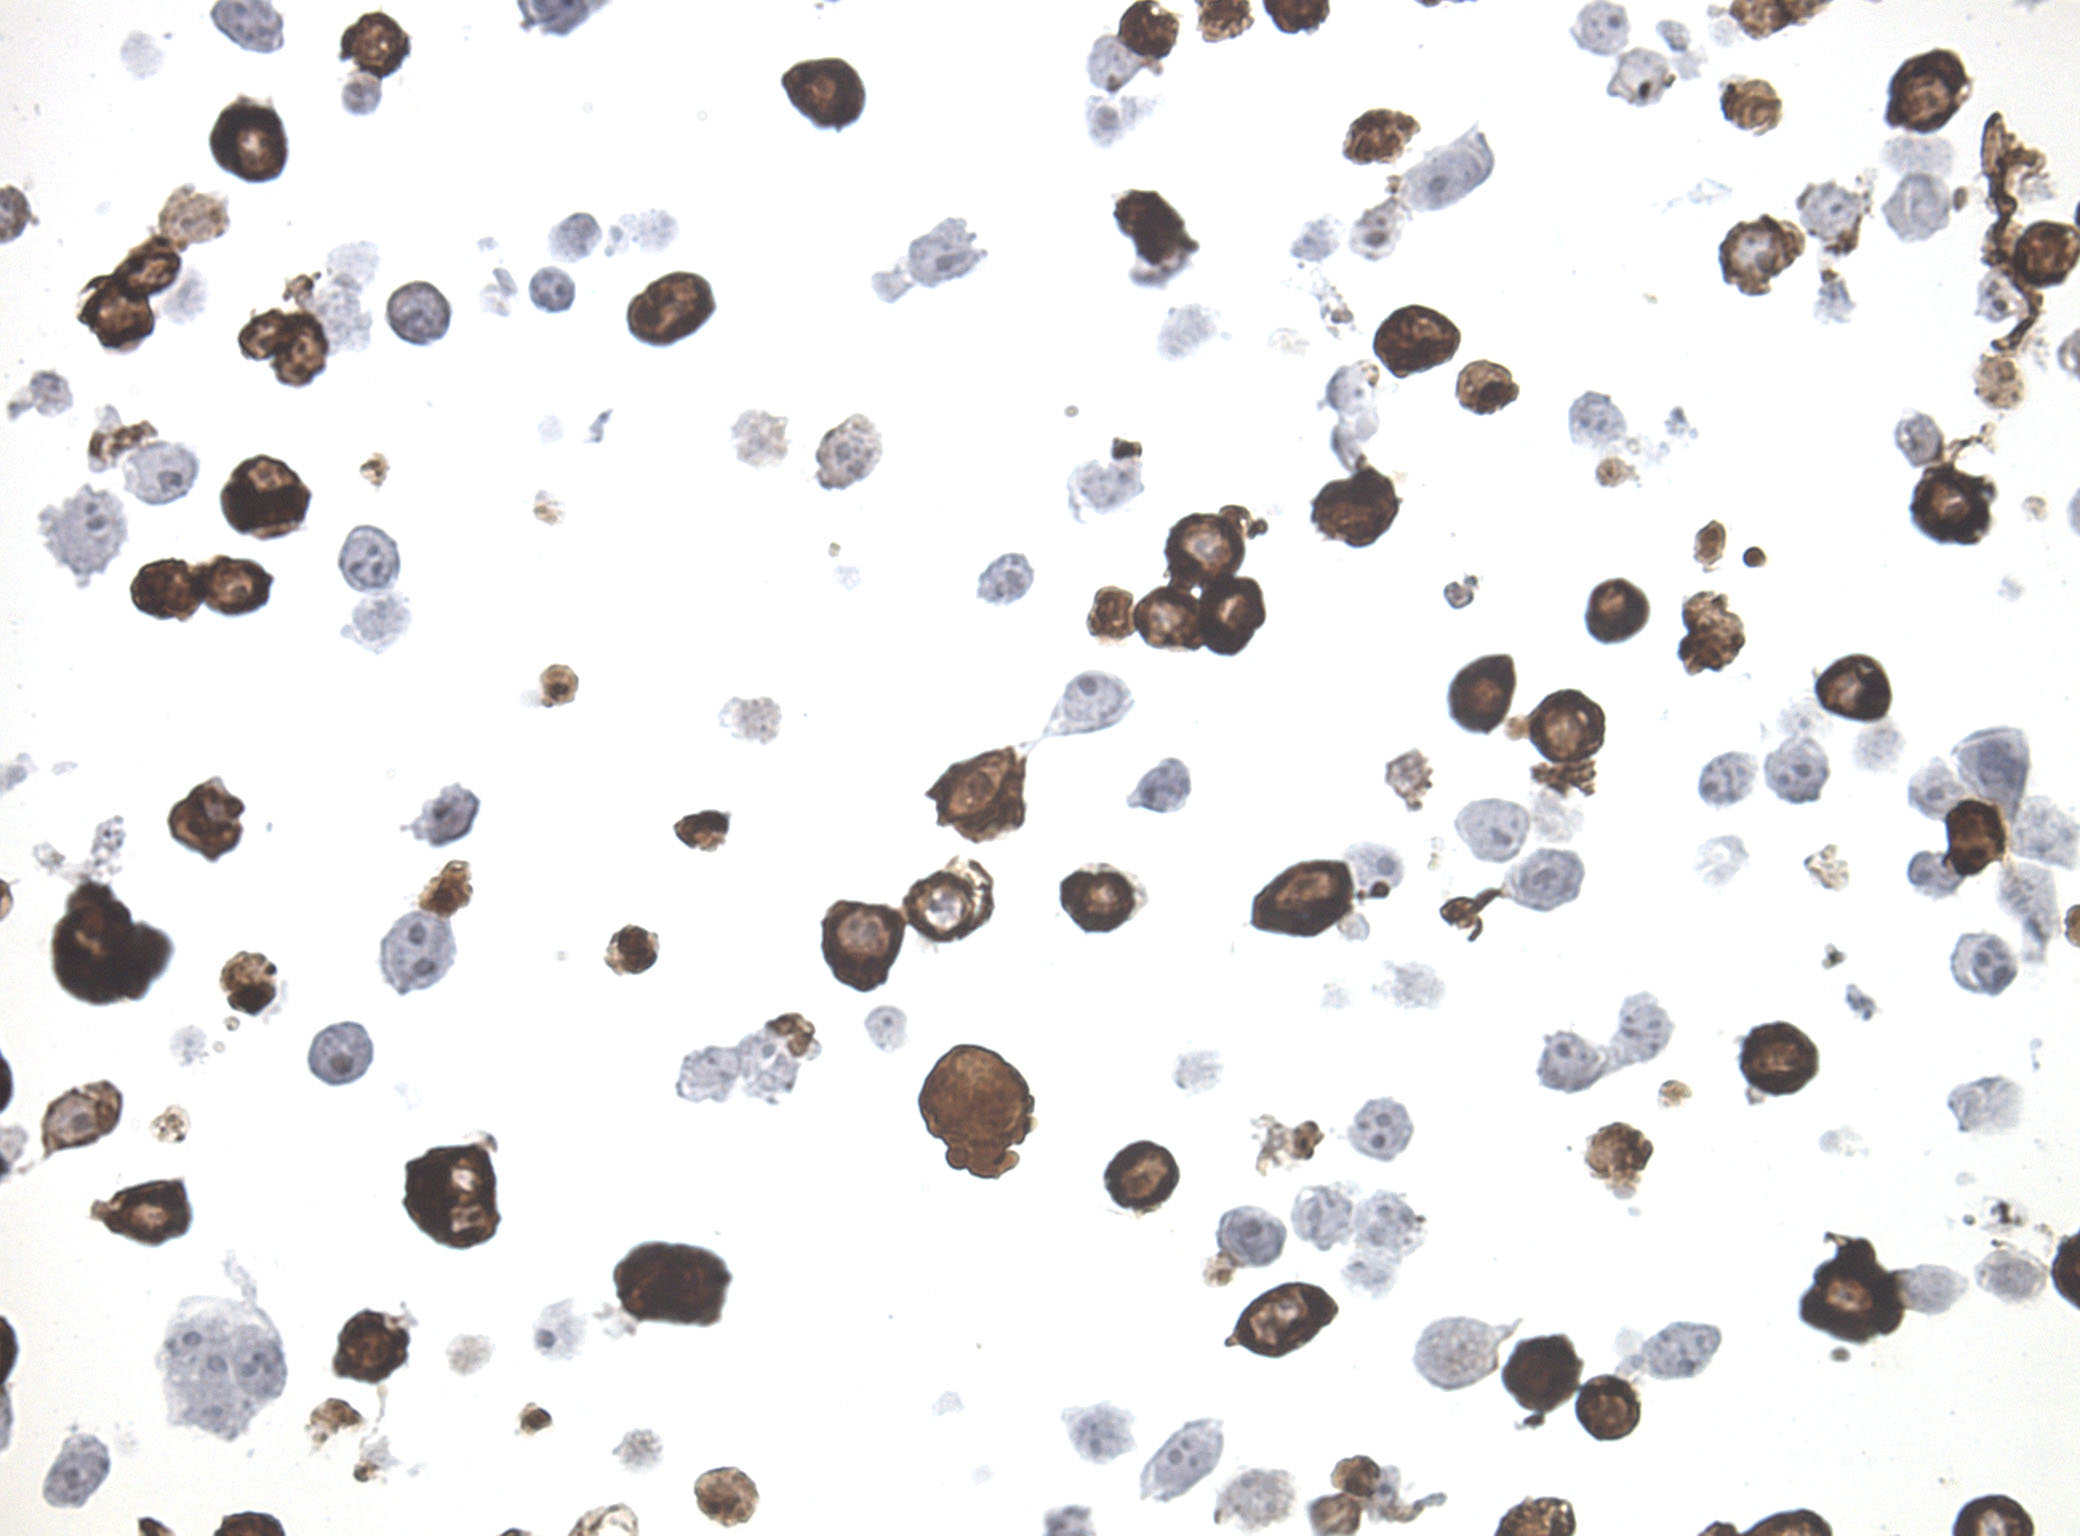 Immunohistology staining on PCDHA13 overexpressed cytosection TS419904P5 with mouse anti DDK clone OTI11C3 C/N TA180144 at 1:400 dilution 4C O/N. Antibody staining was achieved with HIER Citrate pH6 , Polink1 with DAB chromogen detection kit (D11-18). Positive stain shown with the brown chromogen present. HEK293T cells were transfected with cDNA clone RC219904, 5 micron sections, 40x magnification